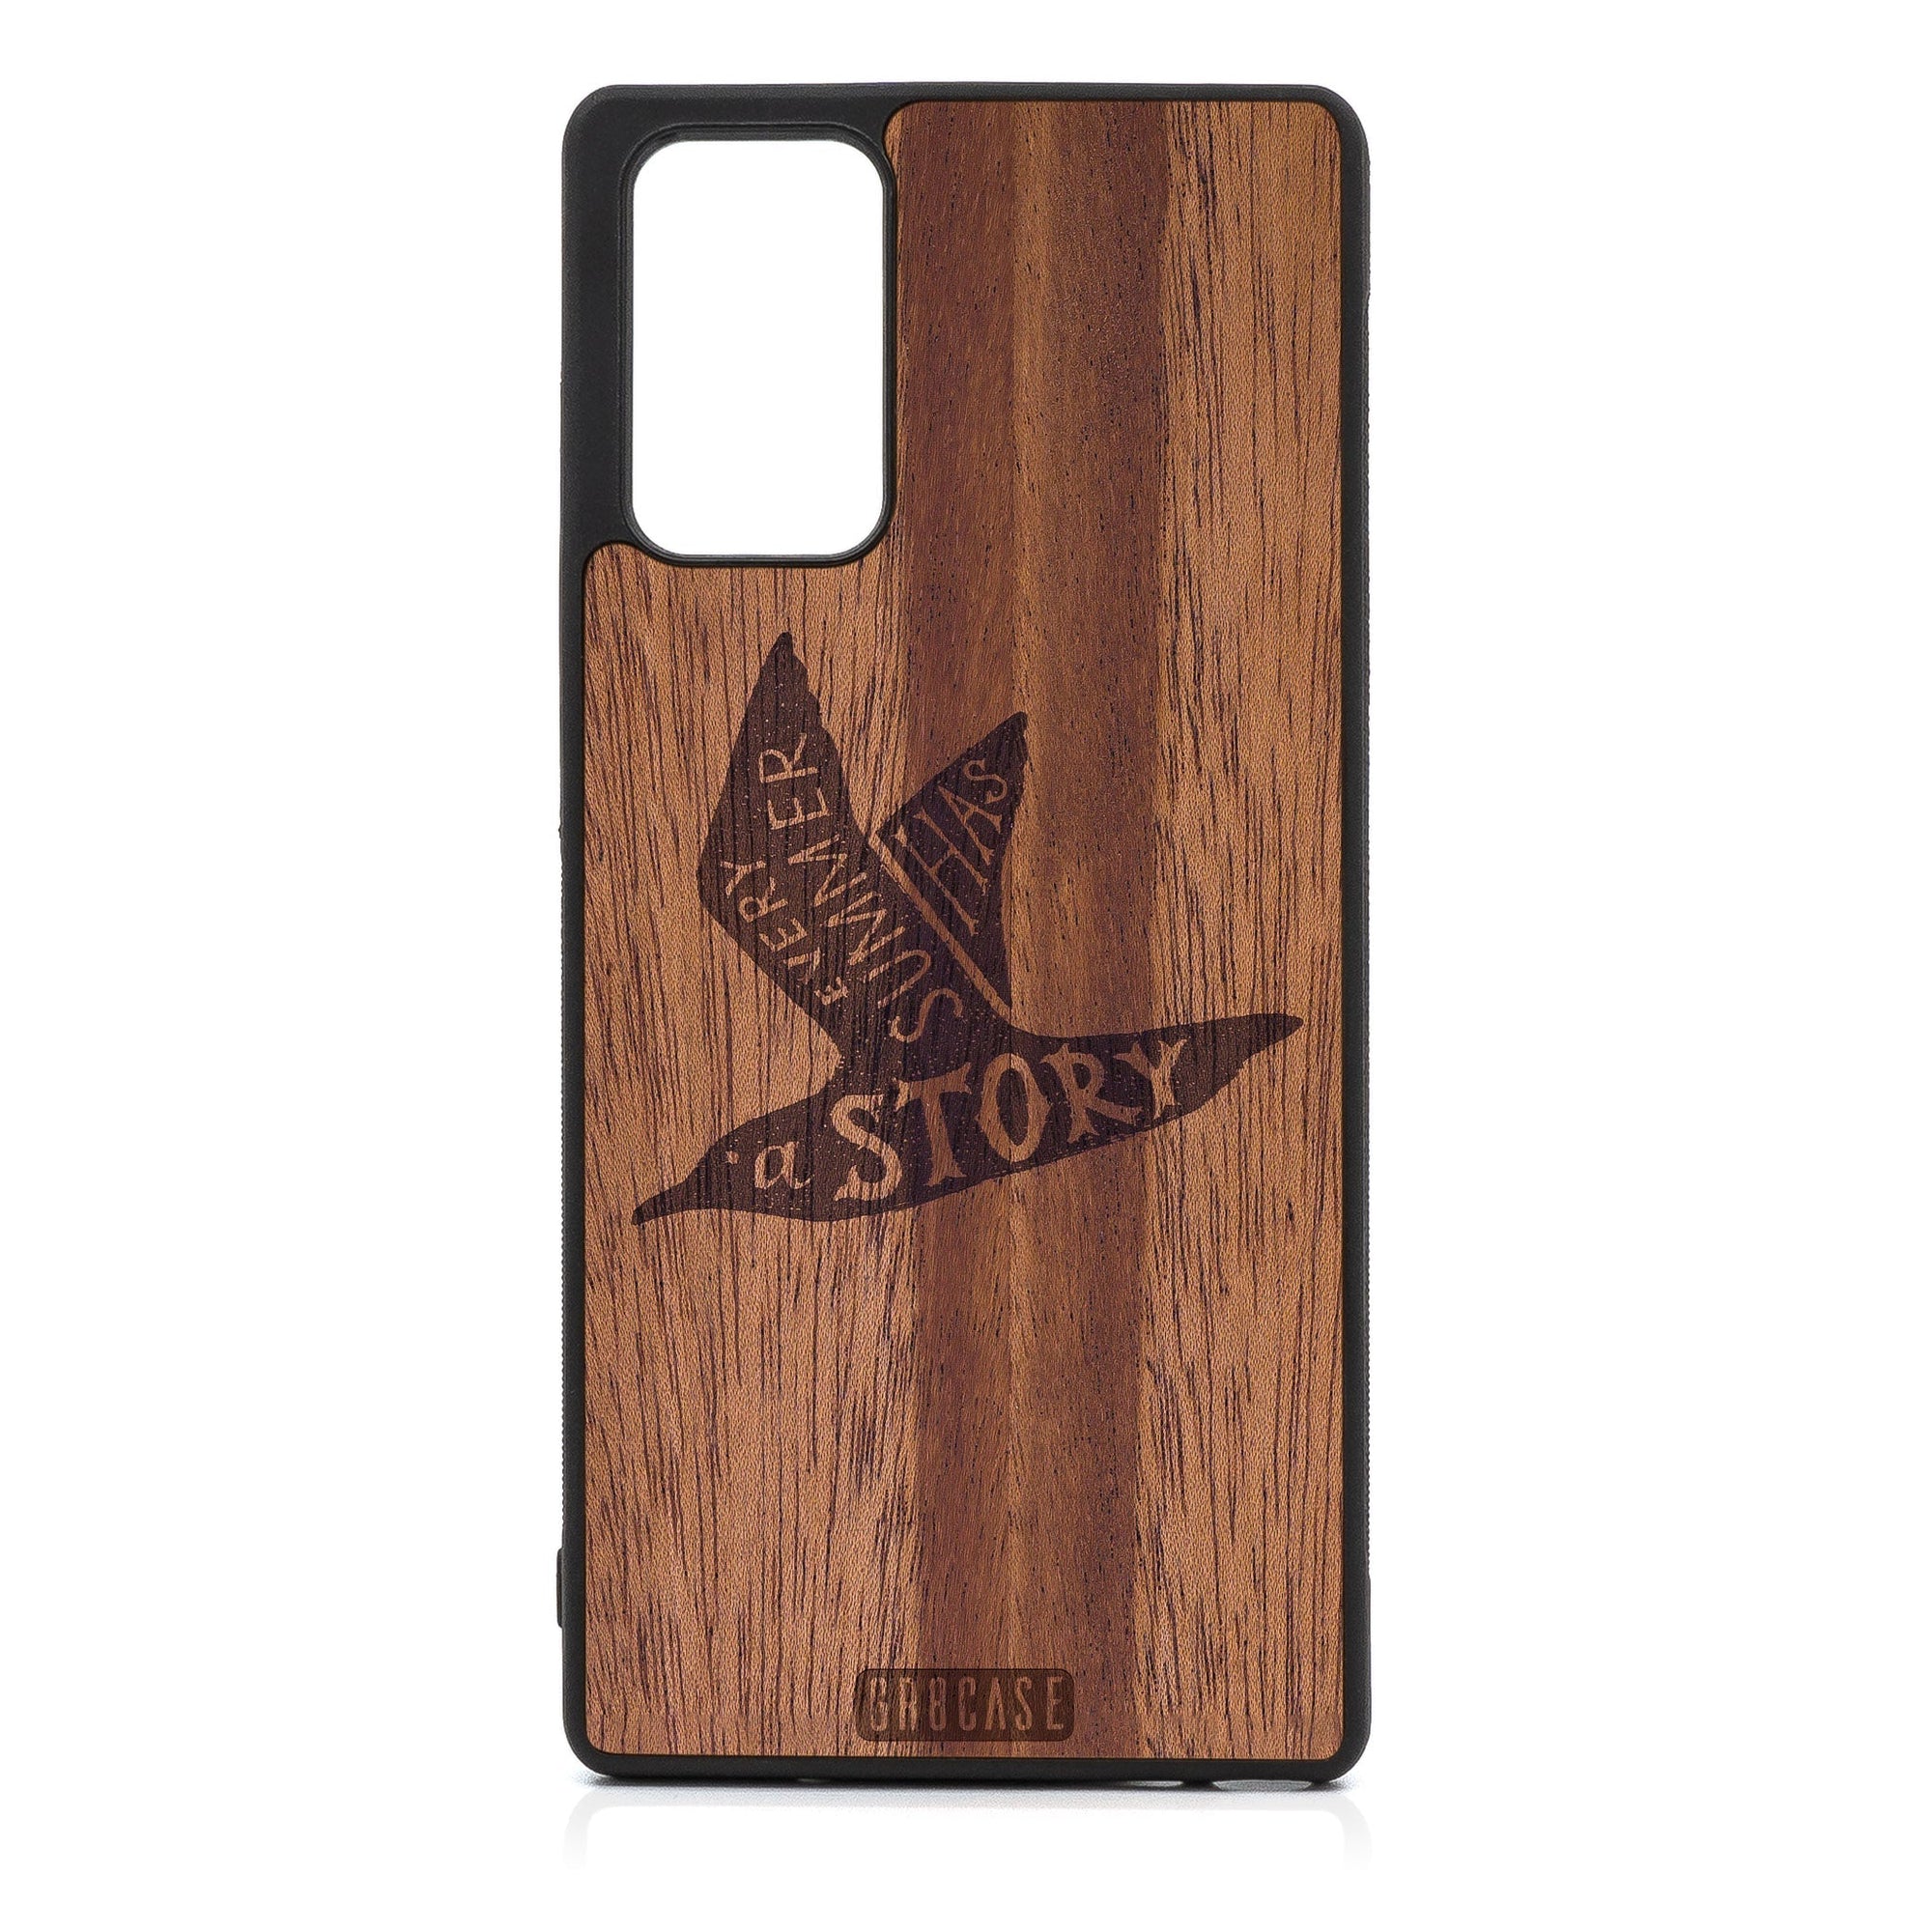 Every Summer Has A Story (Seagull) Design Wood Case For Samsung Galaxy A73 5G